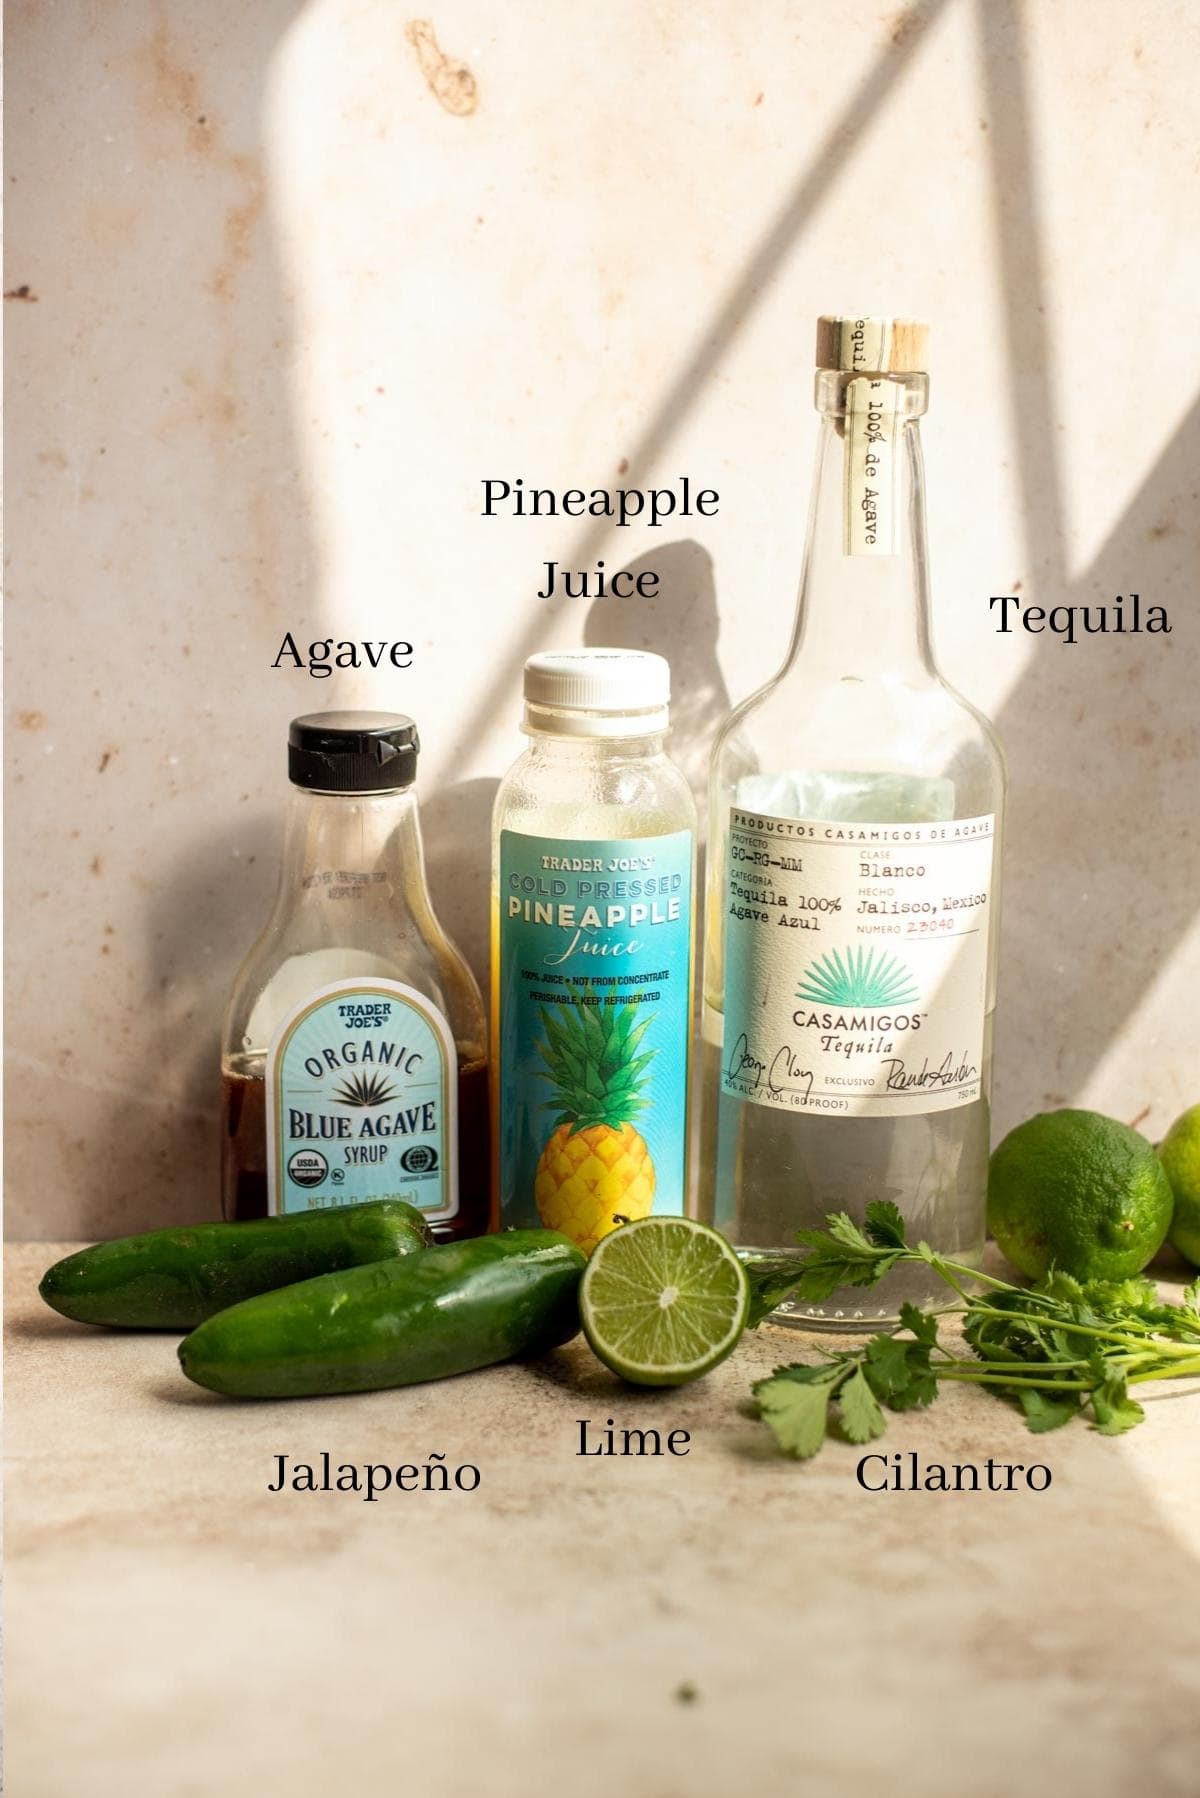 Ingredients for the margaritas lined up against a wall.